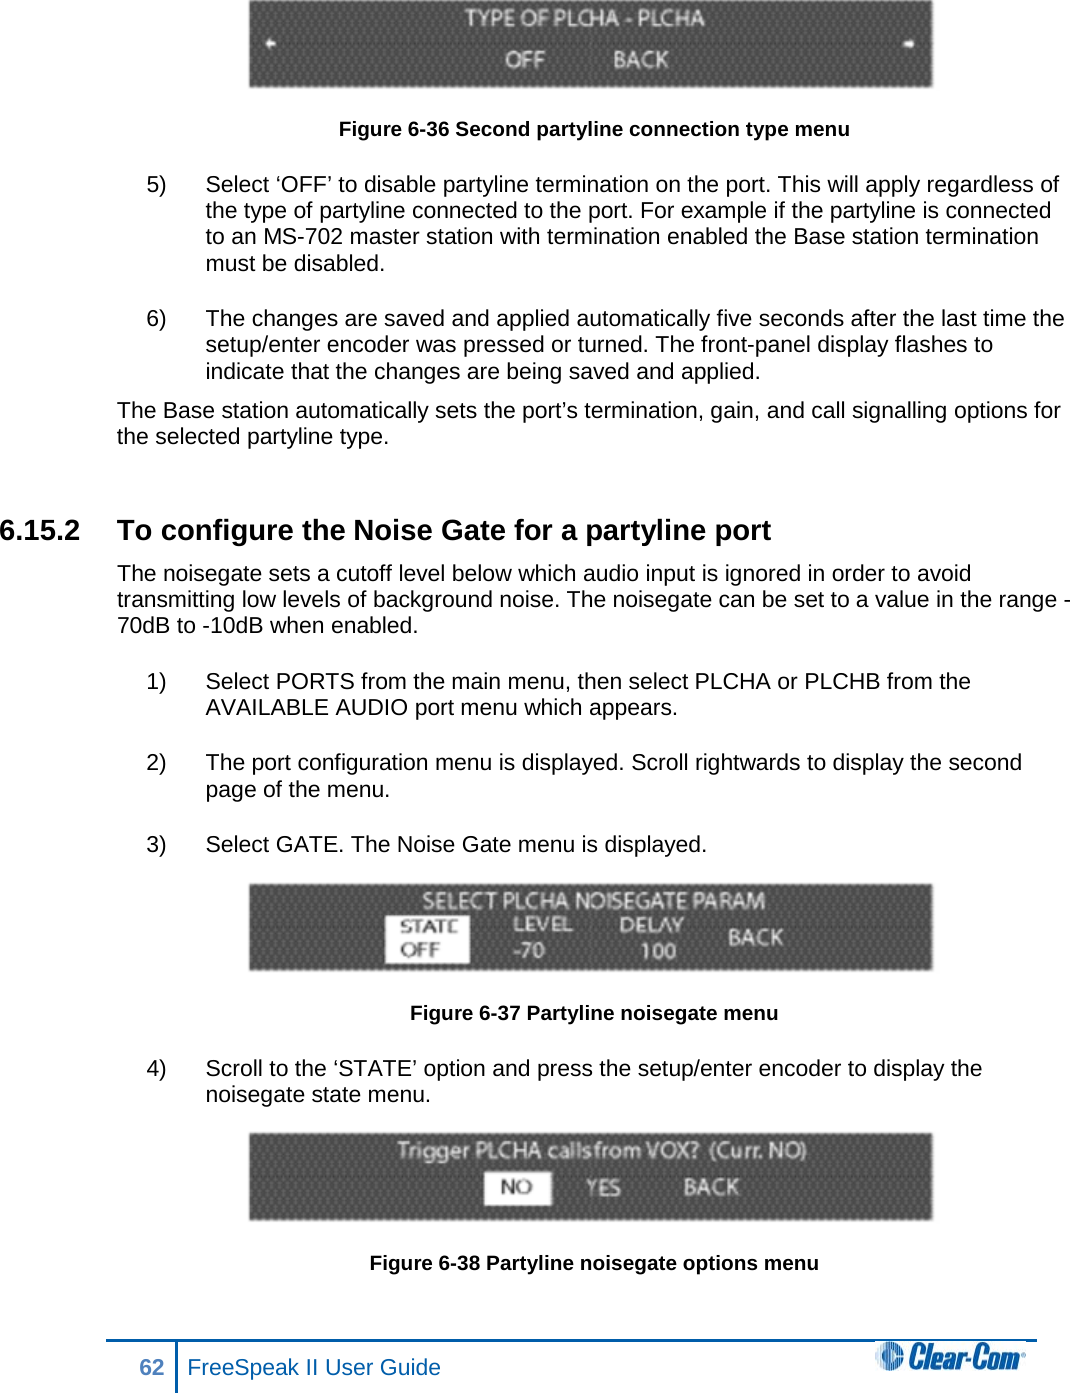  Figure 6-36 Second partyline connection type menu 5) Select ‘OFF’ to disable partyline termination on the port. This will apply regardless of the type of partyline connected to the port. For example if the partyline is connected to an MS-702 master station with termination enabled the Base station termination must be disabled. 6) The changes are saved and applied automatically five seconds after the last time the setup/enter encoder was pressed or turned. The front-panel display flashes to indicate that the changes are being saved and applied.  The Base station automatically sets the port’s termination, gain, and call signalling options for the selected partyline type.   6.15.2 To configure the Noise Gate for a partyline port The noisegate sets a cutoff level below which audio input is ignored in order to avoid transmitting low levels of background noise. The noisegate can be set to a value in the range -70dB to -10dB when enabled. 1) Select PORTS from the main menu, then select PLCHA or PLCHB from the AVAILABLE AUDIO port menu which appears. 2) The port configuration menu is displayed. Scroll rightwards to display the second page of the menu. 3) Select GATE. The Noise Gate menu is displayed.  Figure 6-37 Partyline noisegate menu 4) Scroll to the ‘STATE’ option and press the setup/enter encoder to display the noisegate state menu.  Figure 6-38 Partyline noisegate options menu 62 FreeSpeak II User Guide  